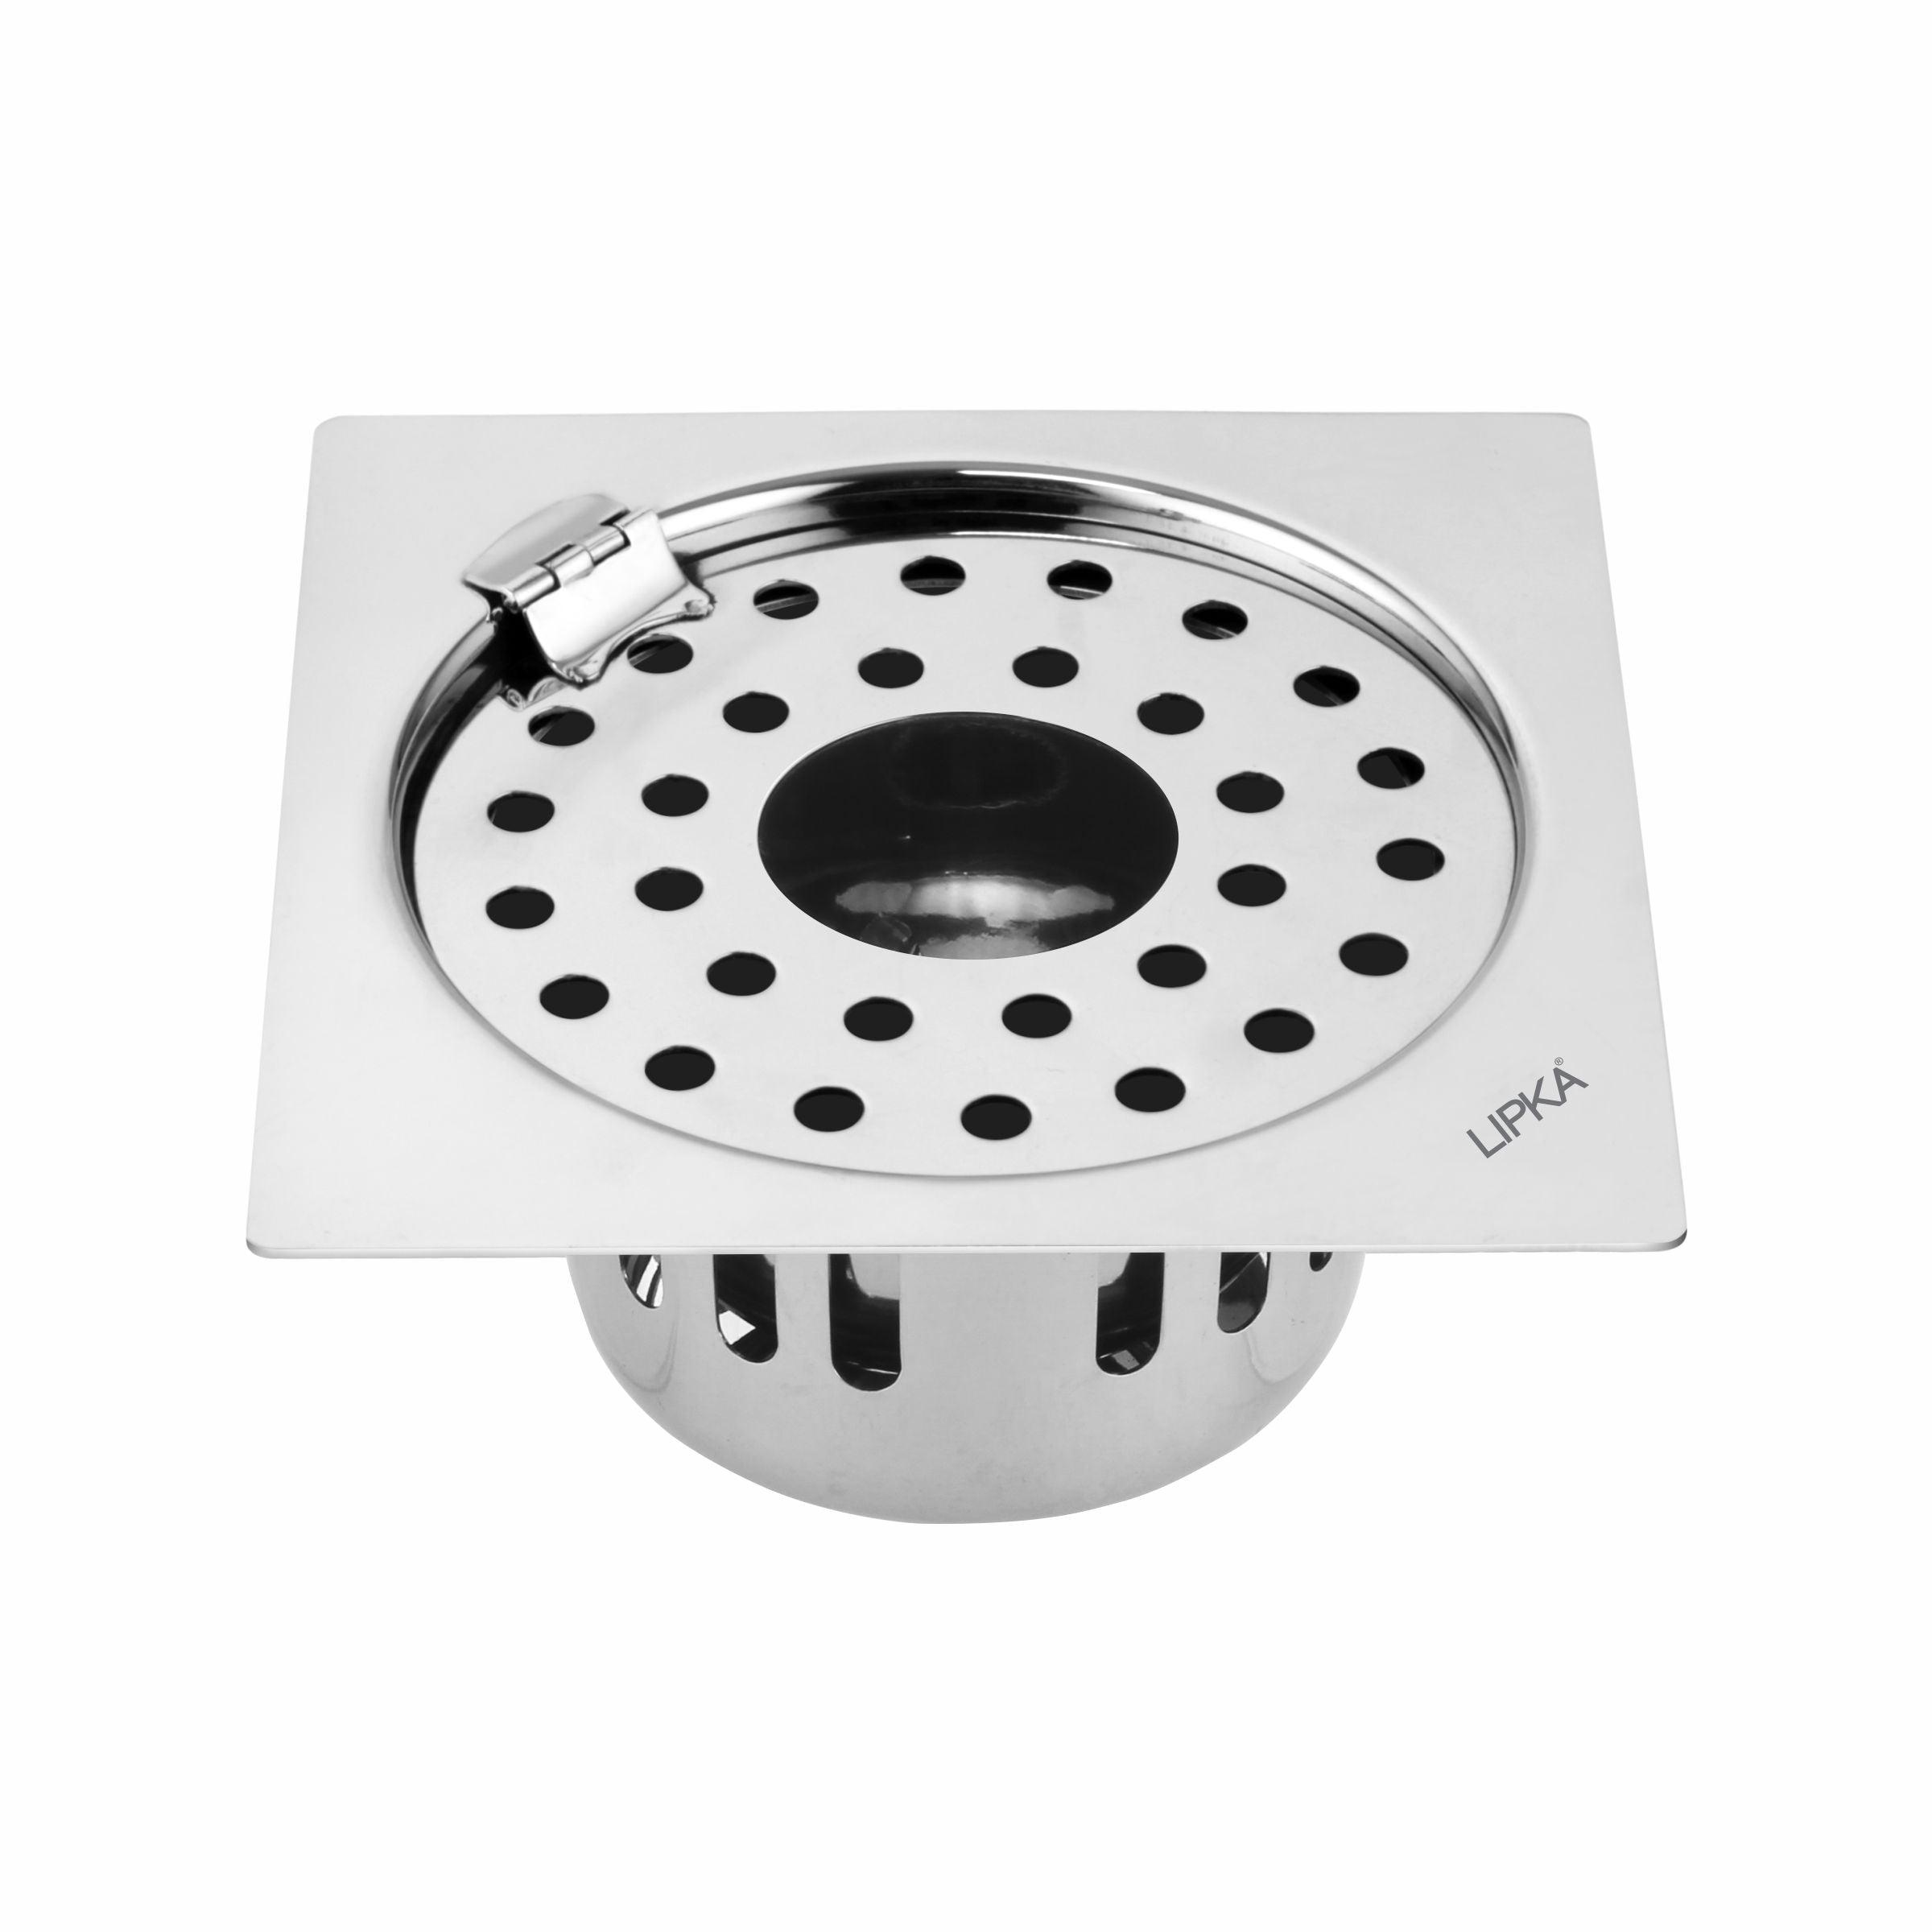 Square Flat Cut Floor Drain (5.5 x 5.5 Inches) with Hinge, Hole and Cockroach Trap - LIPKA - Lipka Home